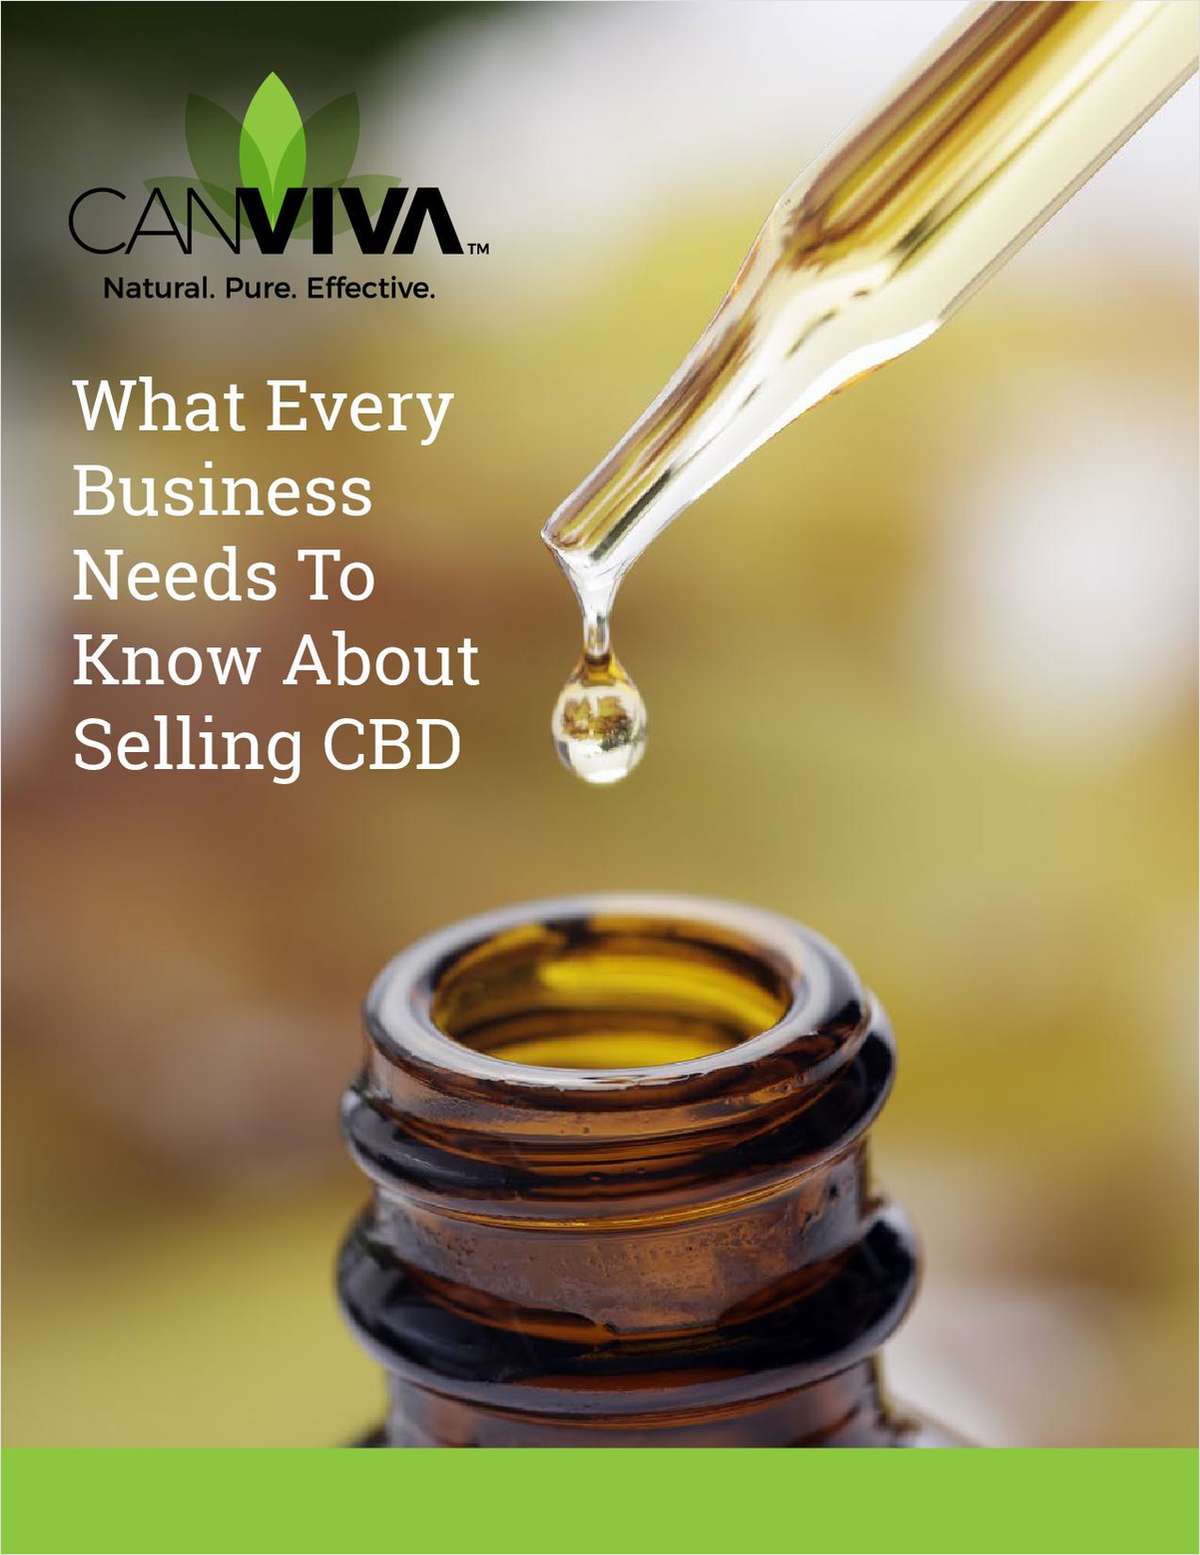 Big Relief, Big Profits: Why Your Business Should Sell CBD Products